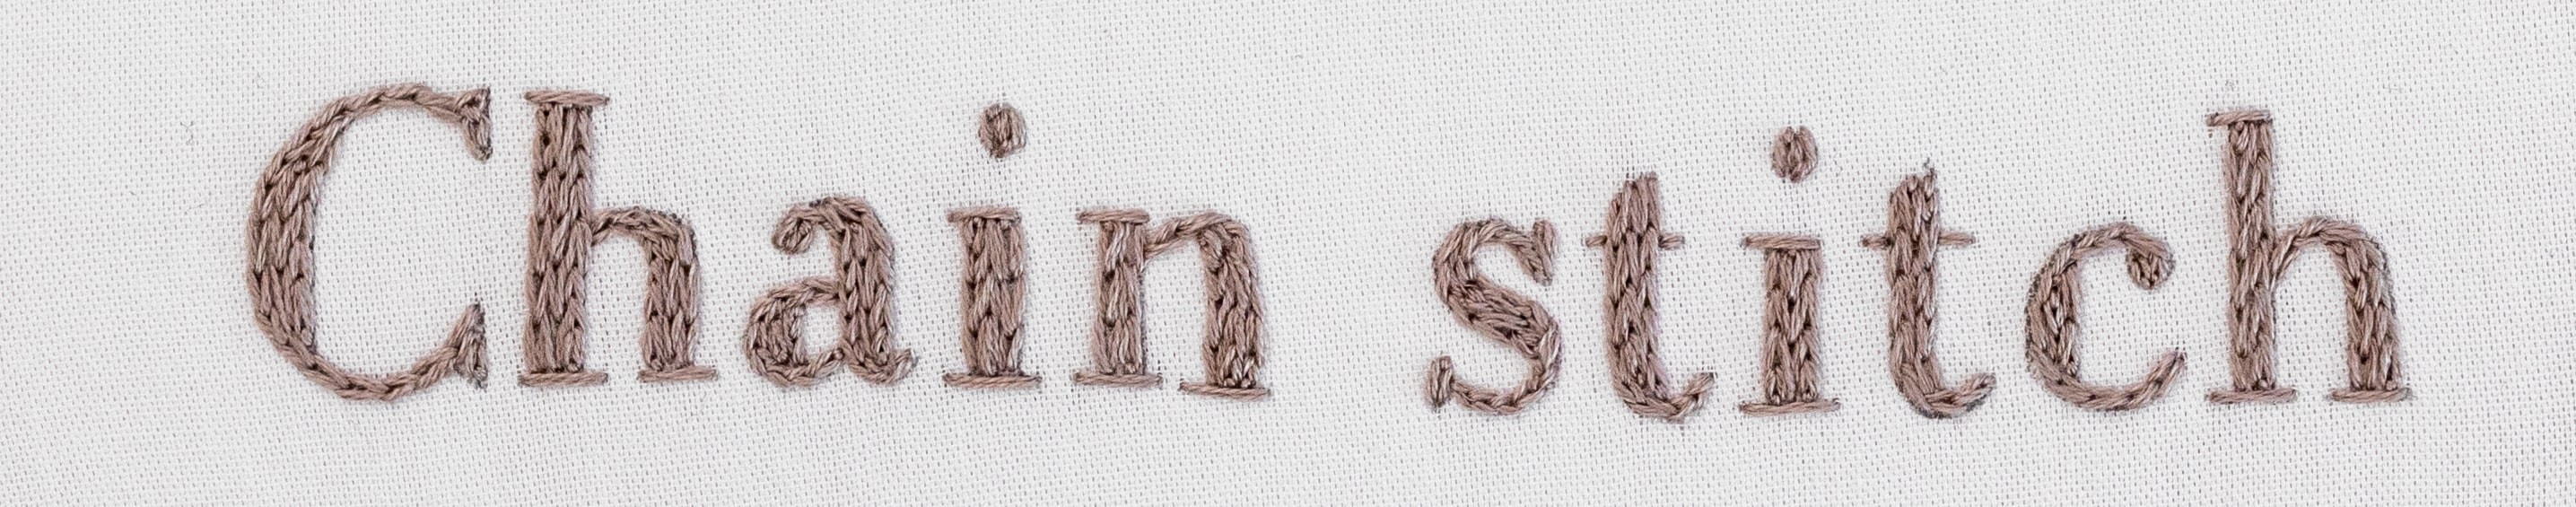 This is the word 'chain stitch' is stitched using chain stitch.